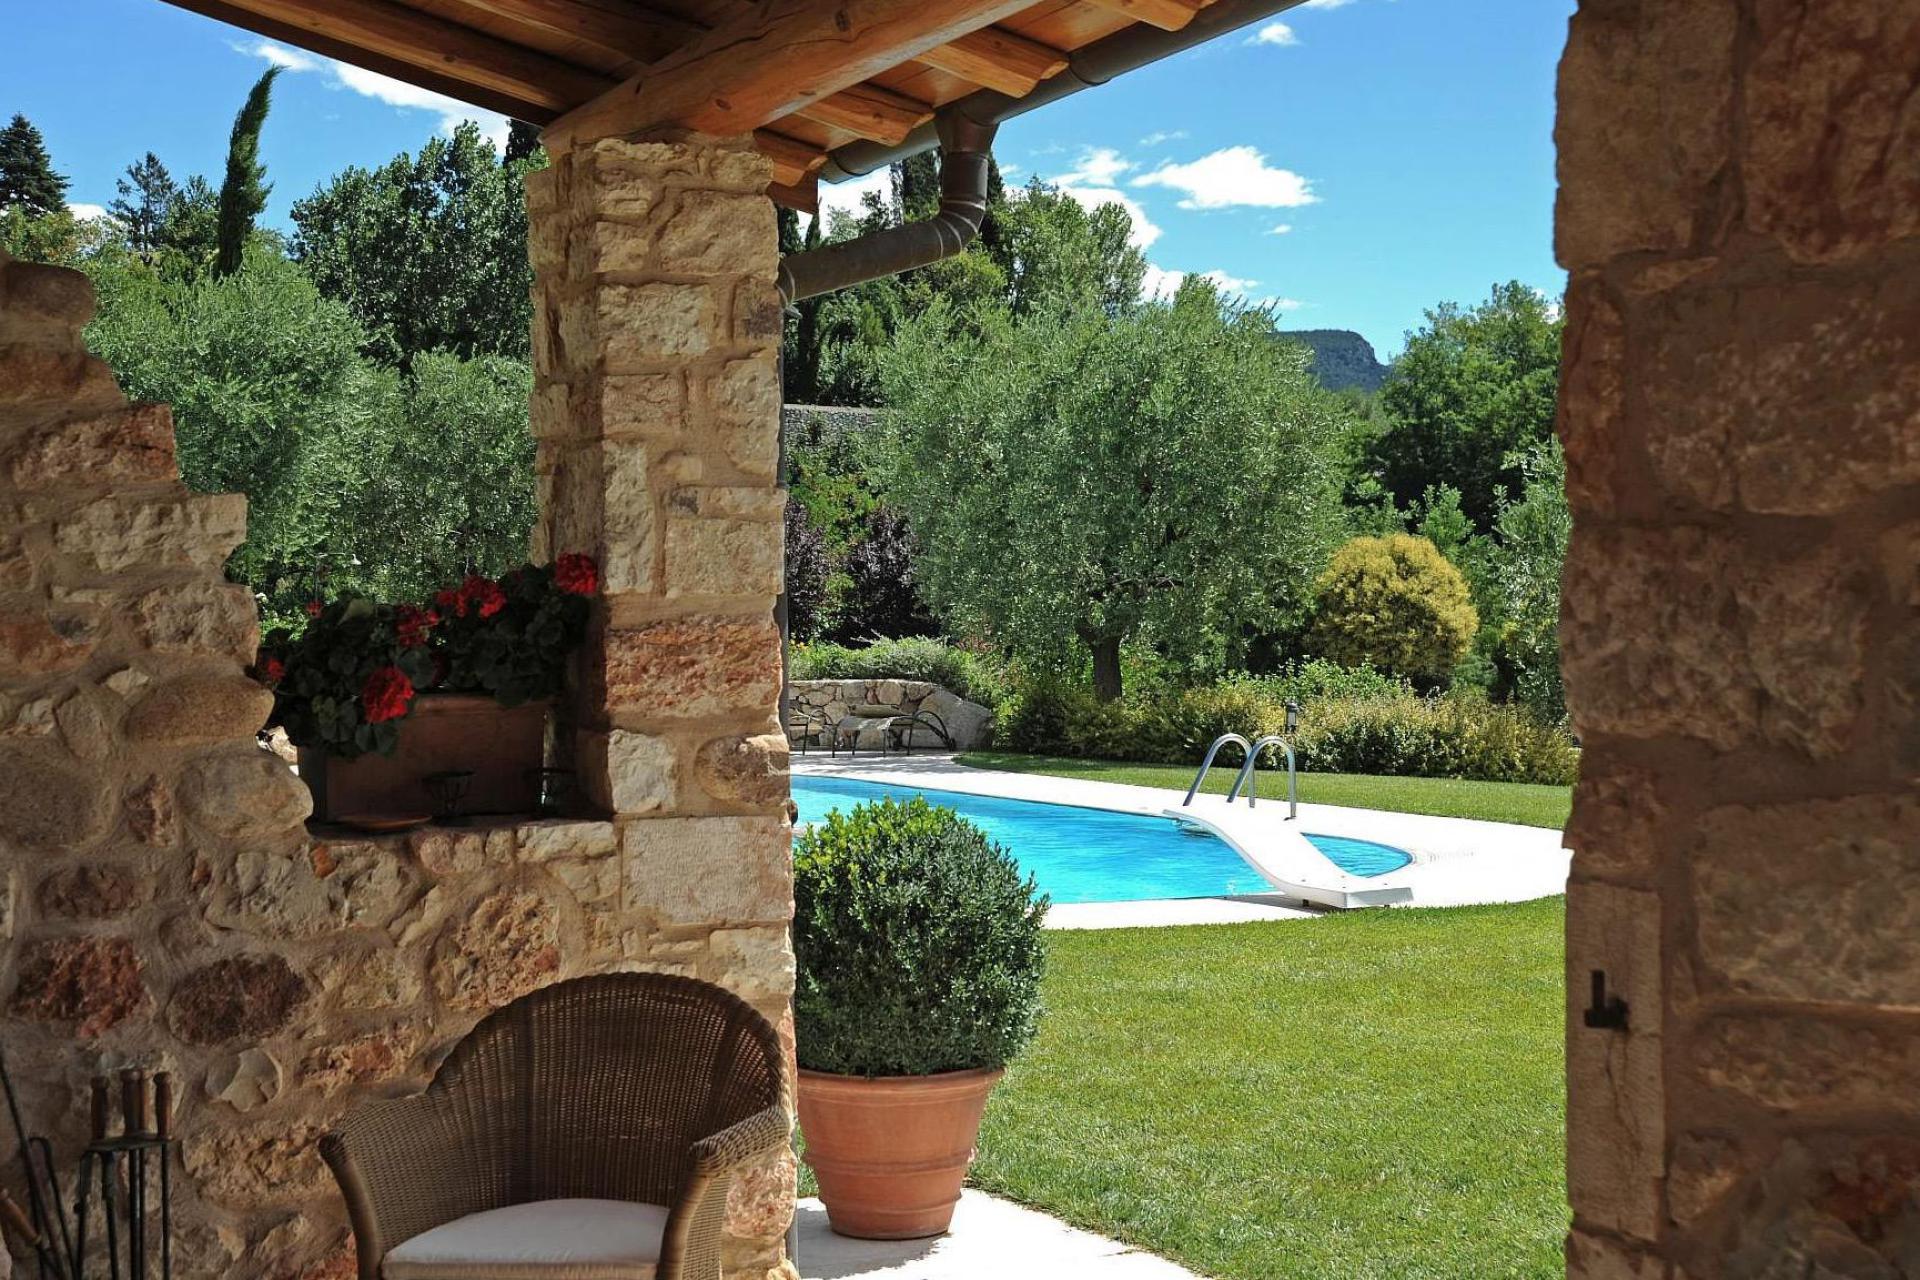 Authentic agriturismo on the edge of a village